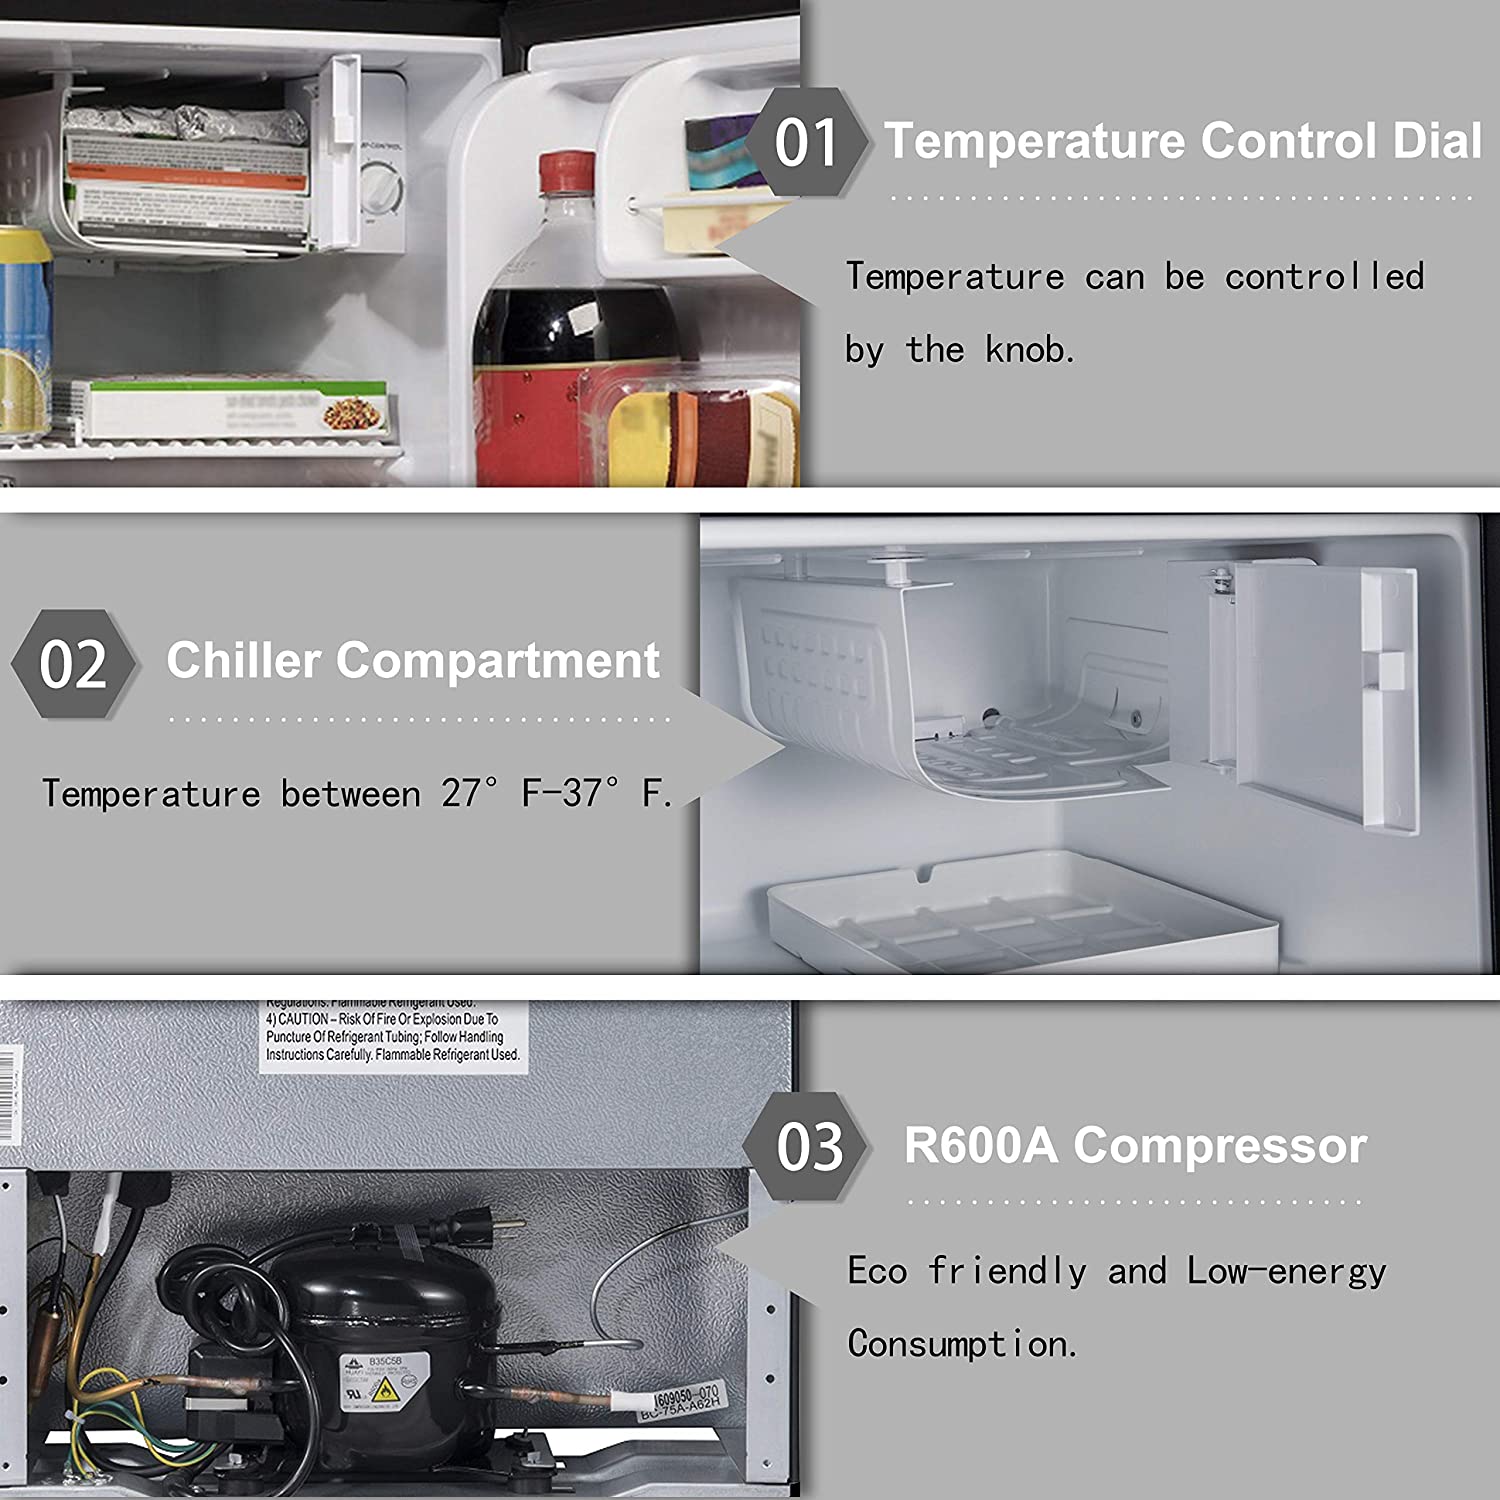 10 Best Countertop Refrigerator 2022 Review: Single Door Mini Fridge with Small Freezer Space for Bedroom/ Kitchen/ Office All In One Cooling Gear Lab: Any Refrigerators Air Conditioners Freezers Ice Makers Coolers Fans Reviewed And Compared.